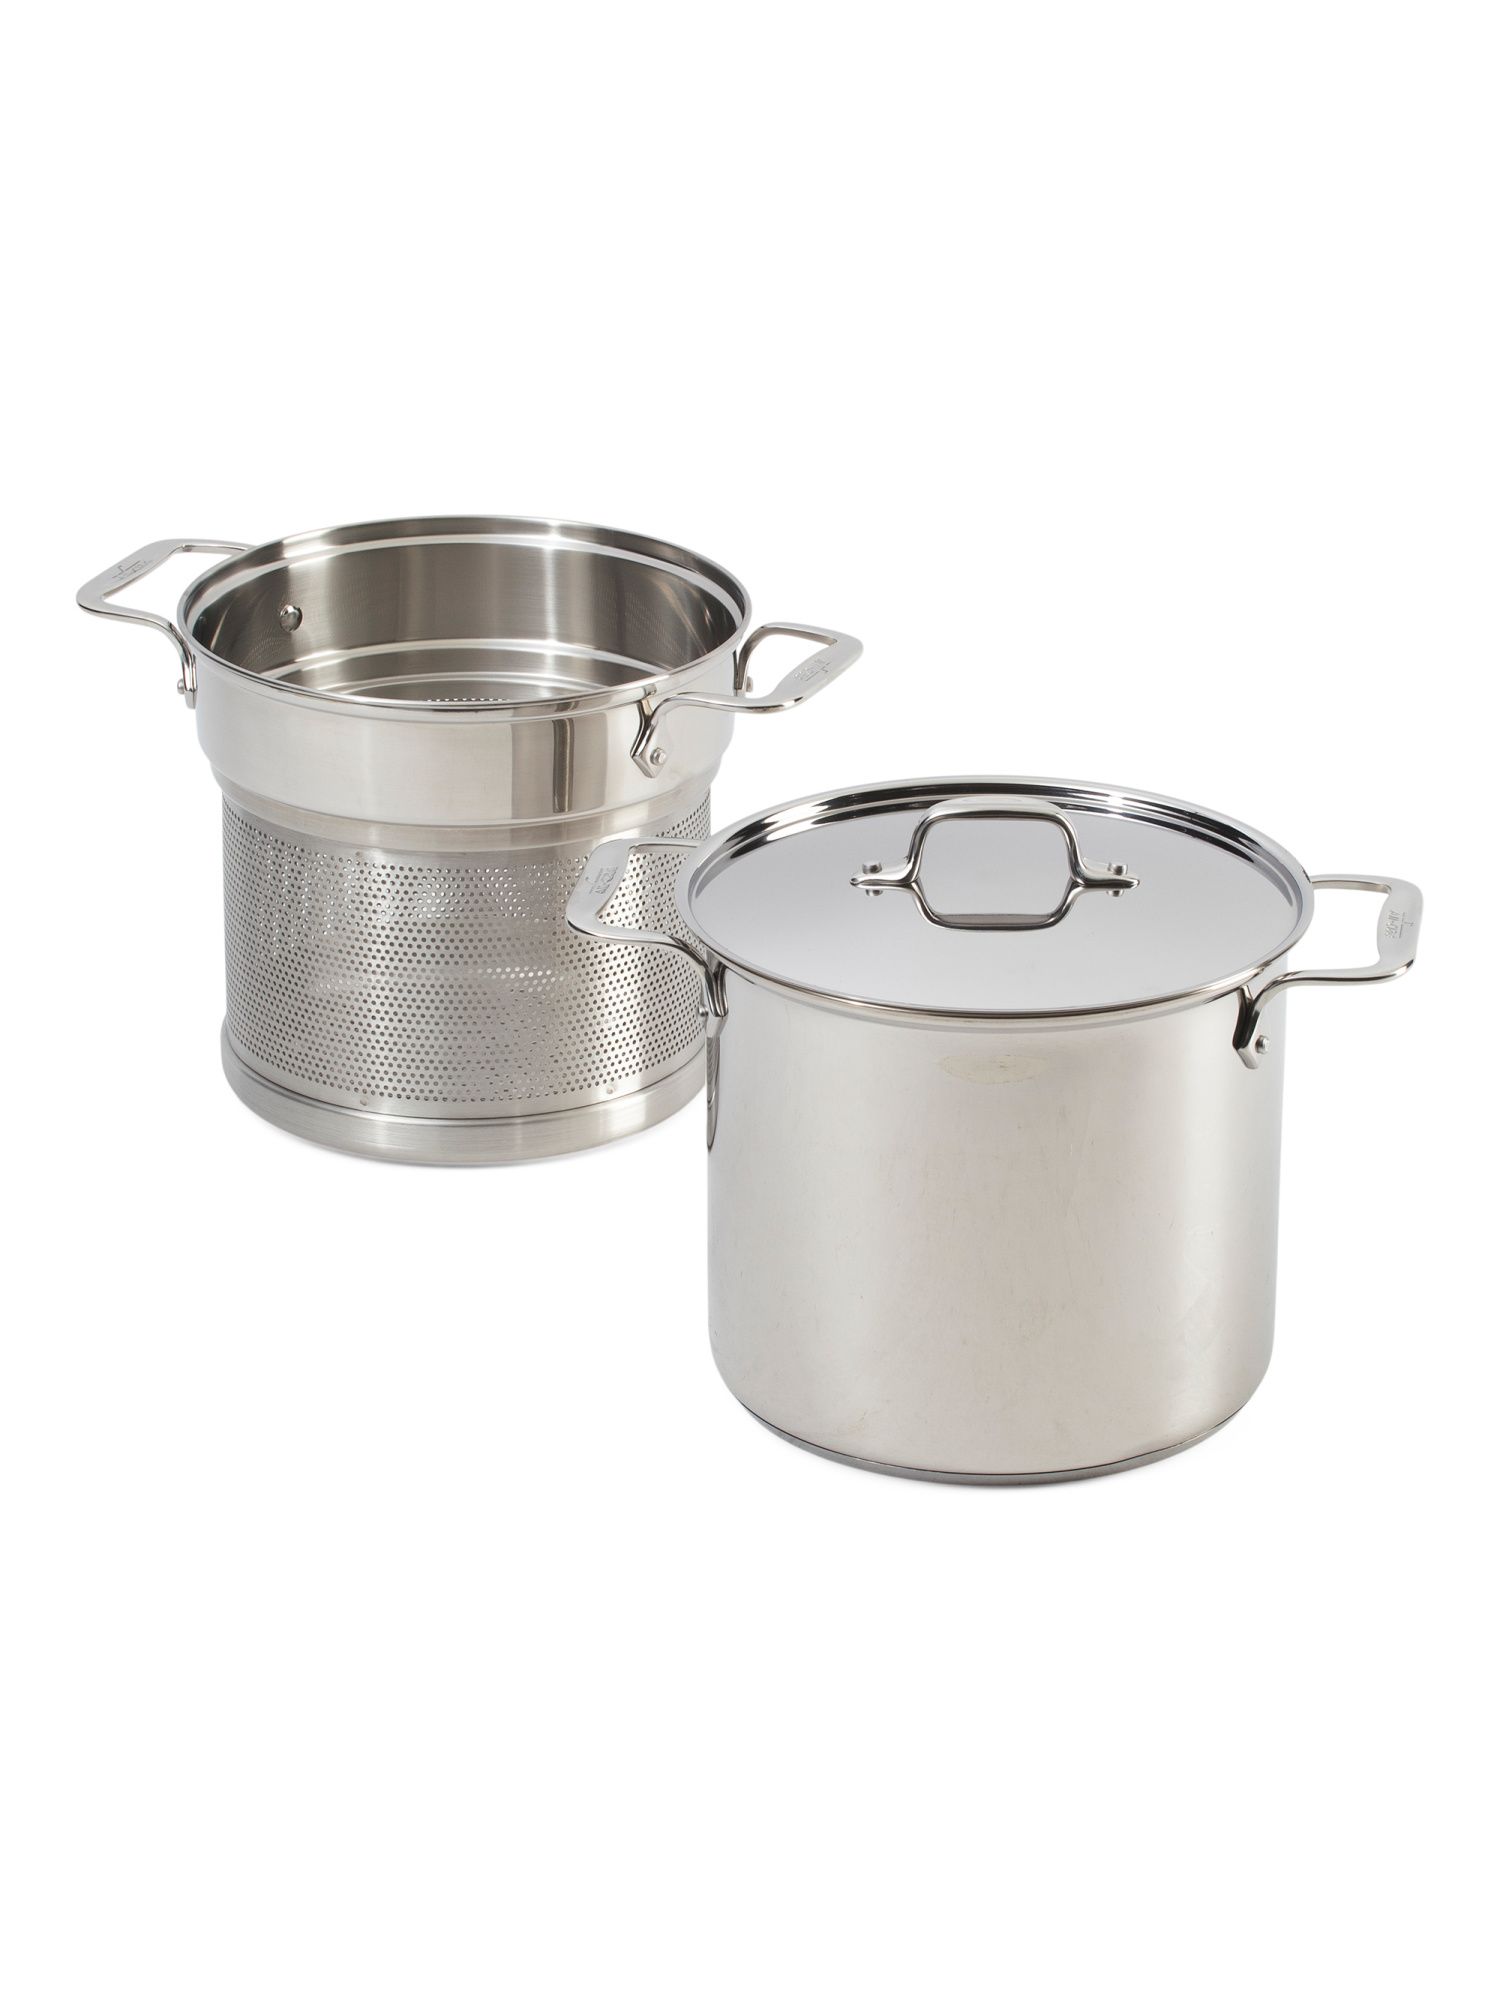 8qt Stainless Steel Pasta Pot With Insert Slightly Blemished | TJ Maxx